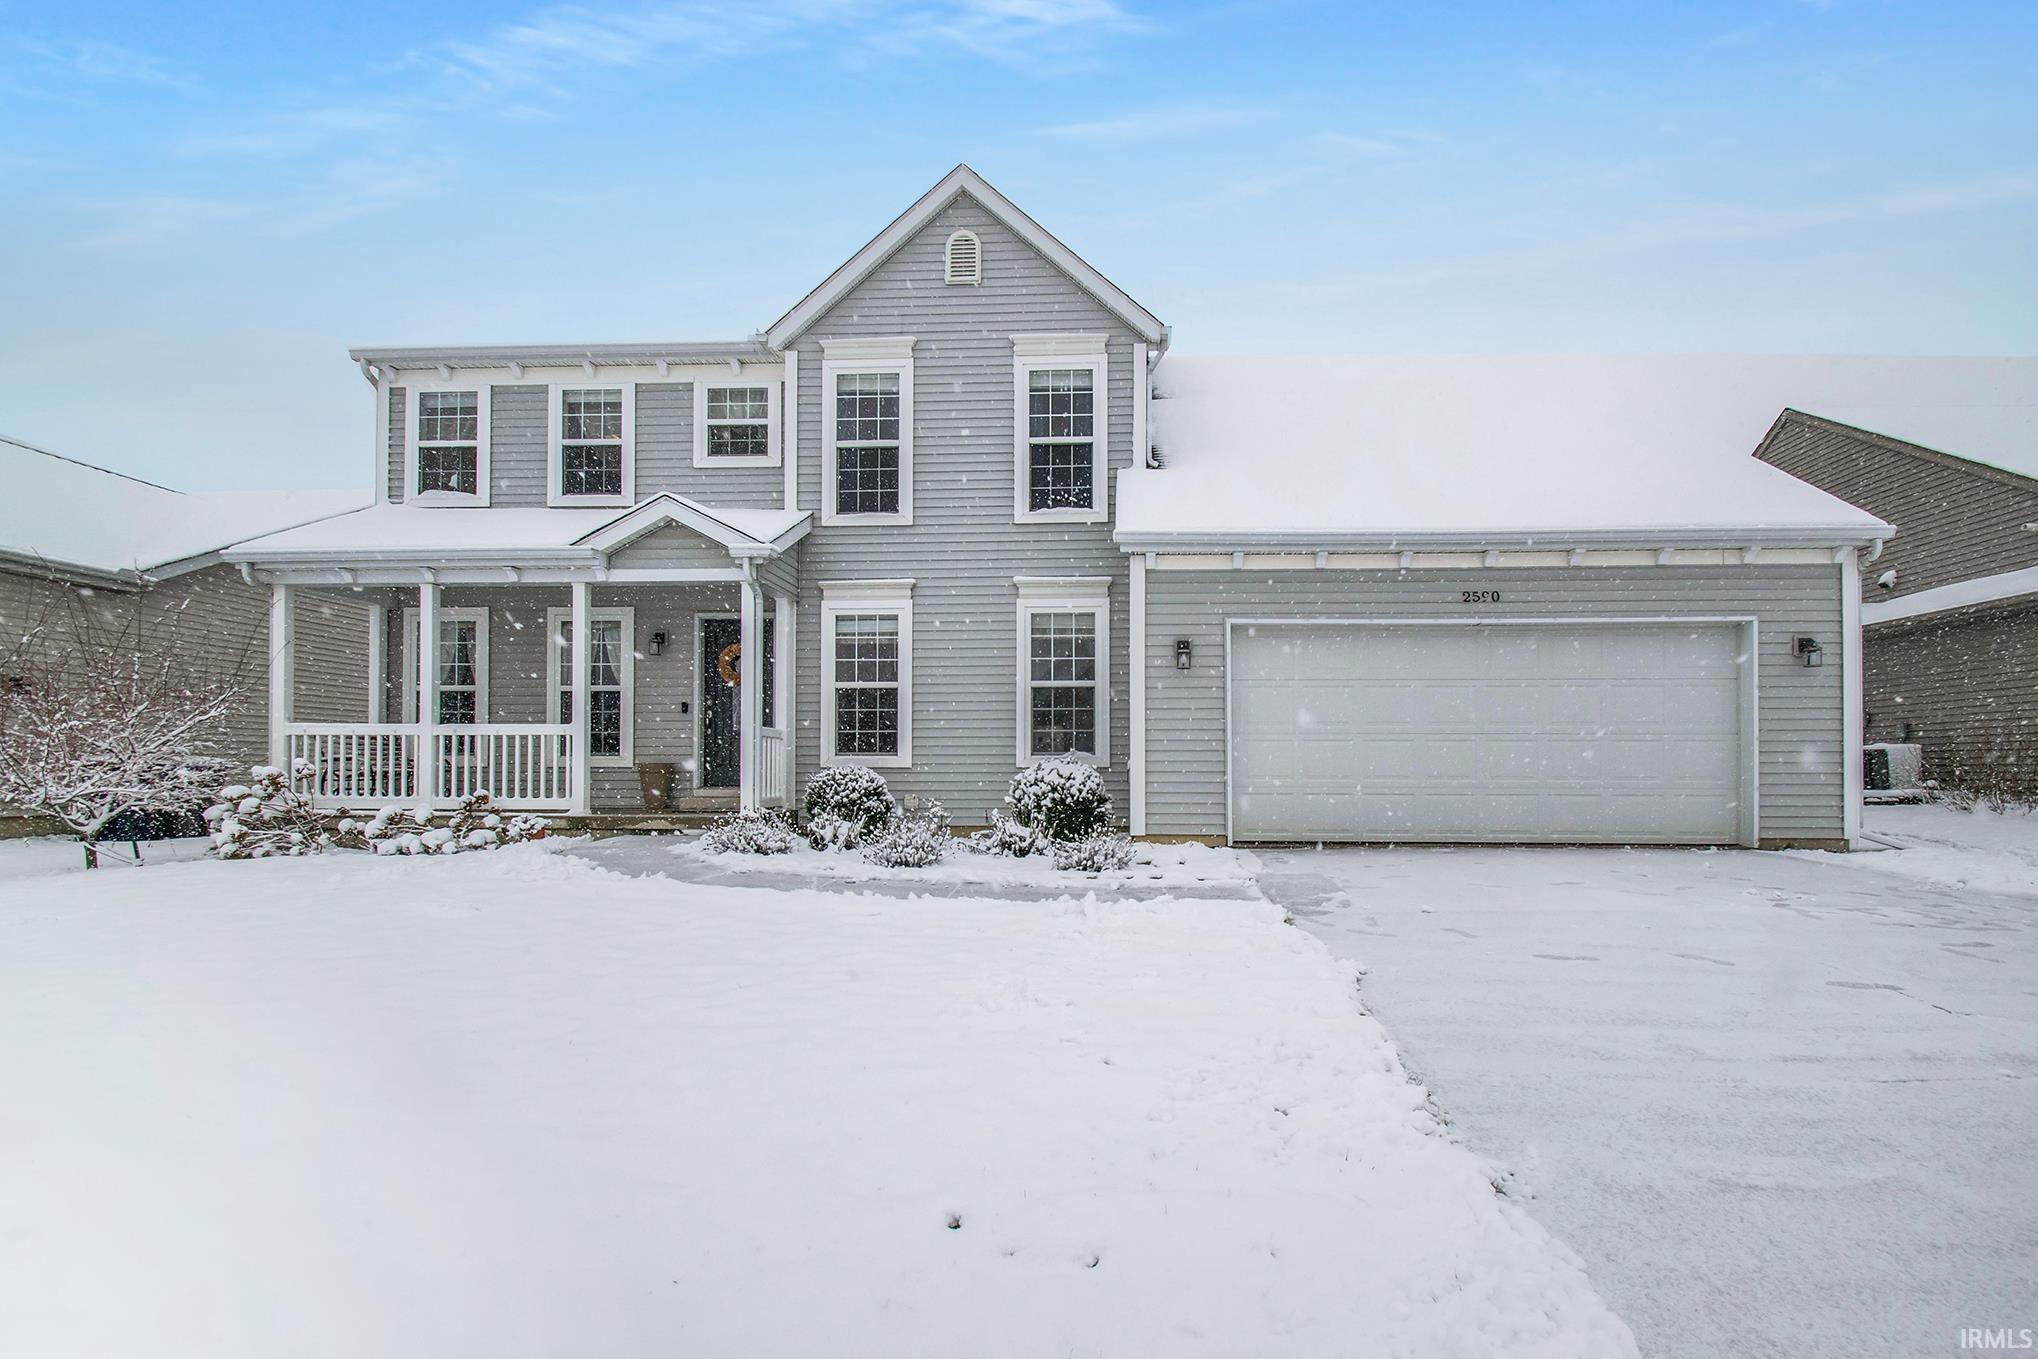 2590 Pine Cone Lane, Warsaw, IN 46582